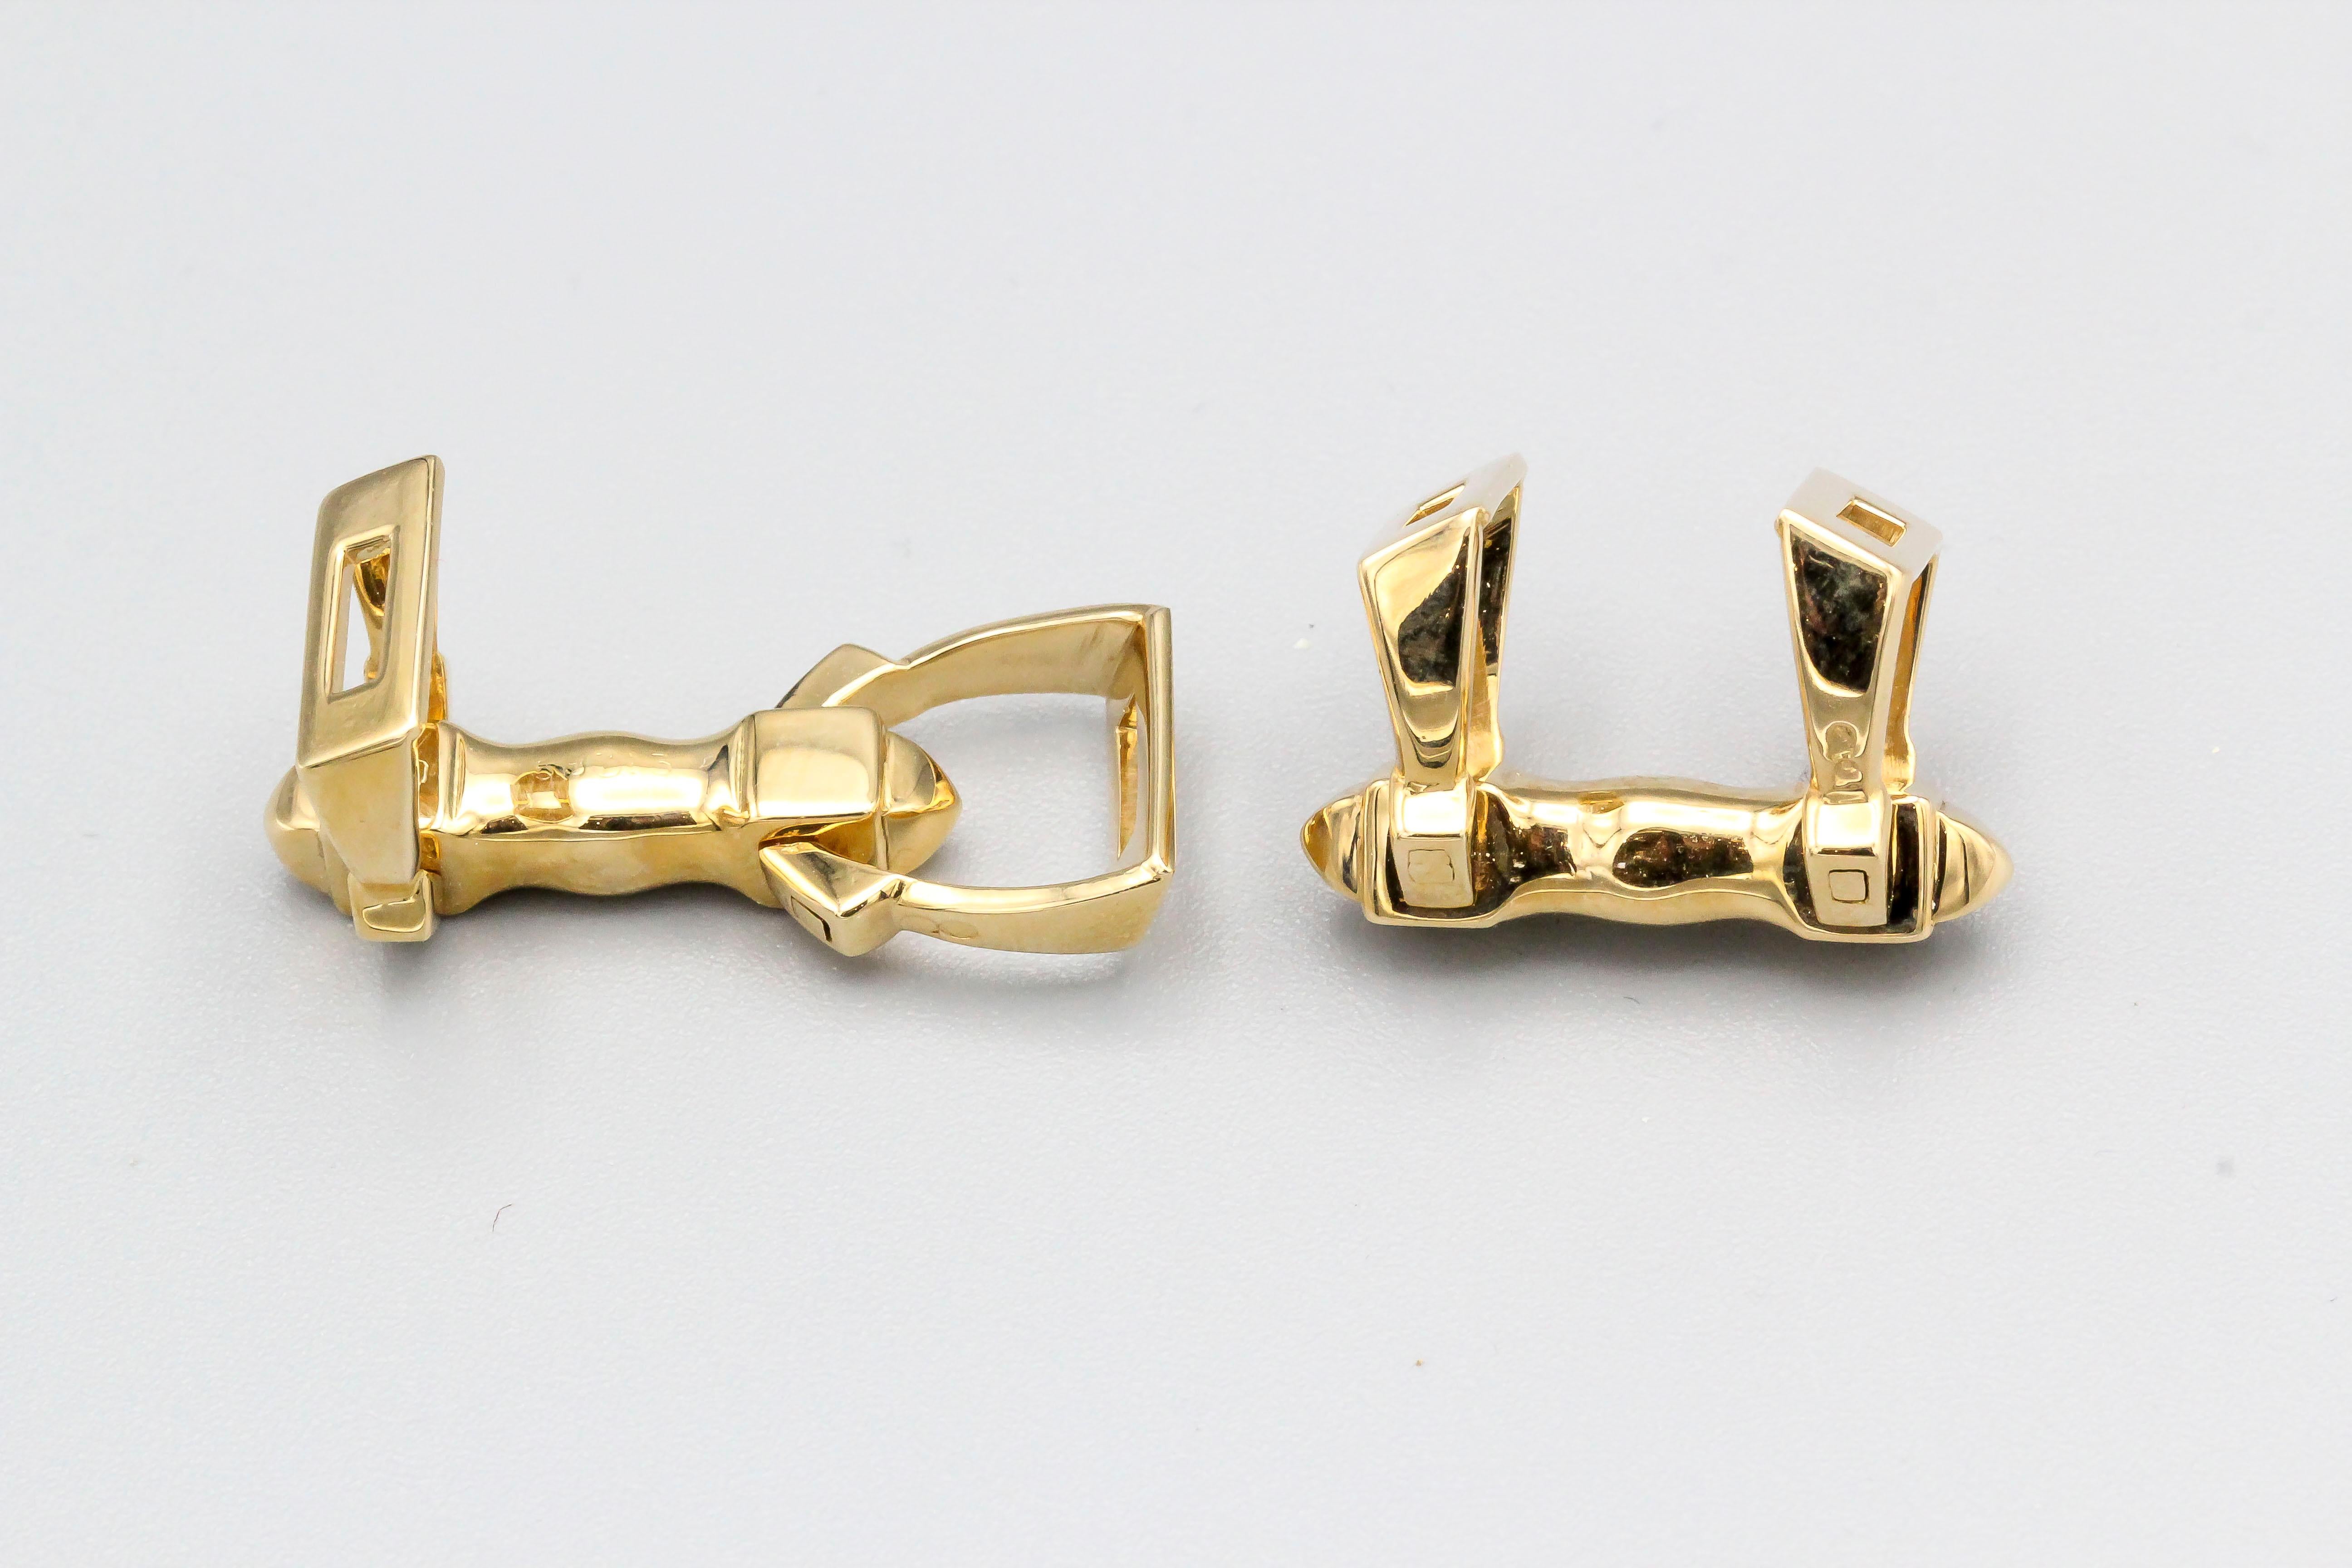 Handsome 18K yellow gold cufflinks by Cartier, circa 1980s.  They resemble horse stirrups. 

Hallmarks: Cartier, 750, reference numbers.
